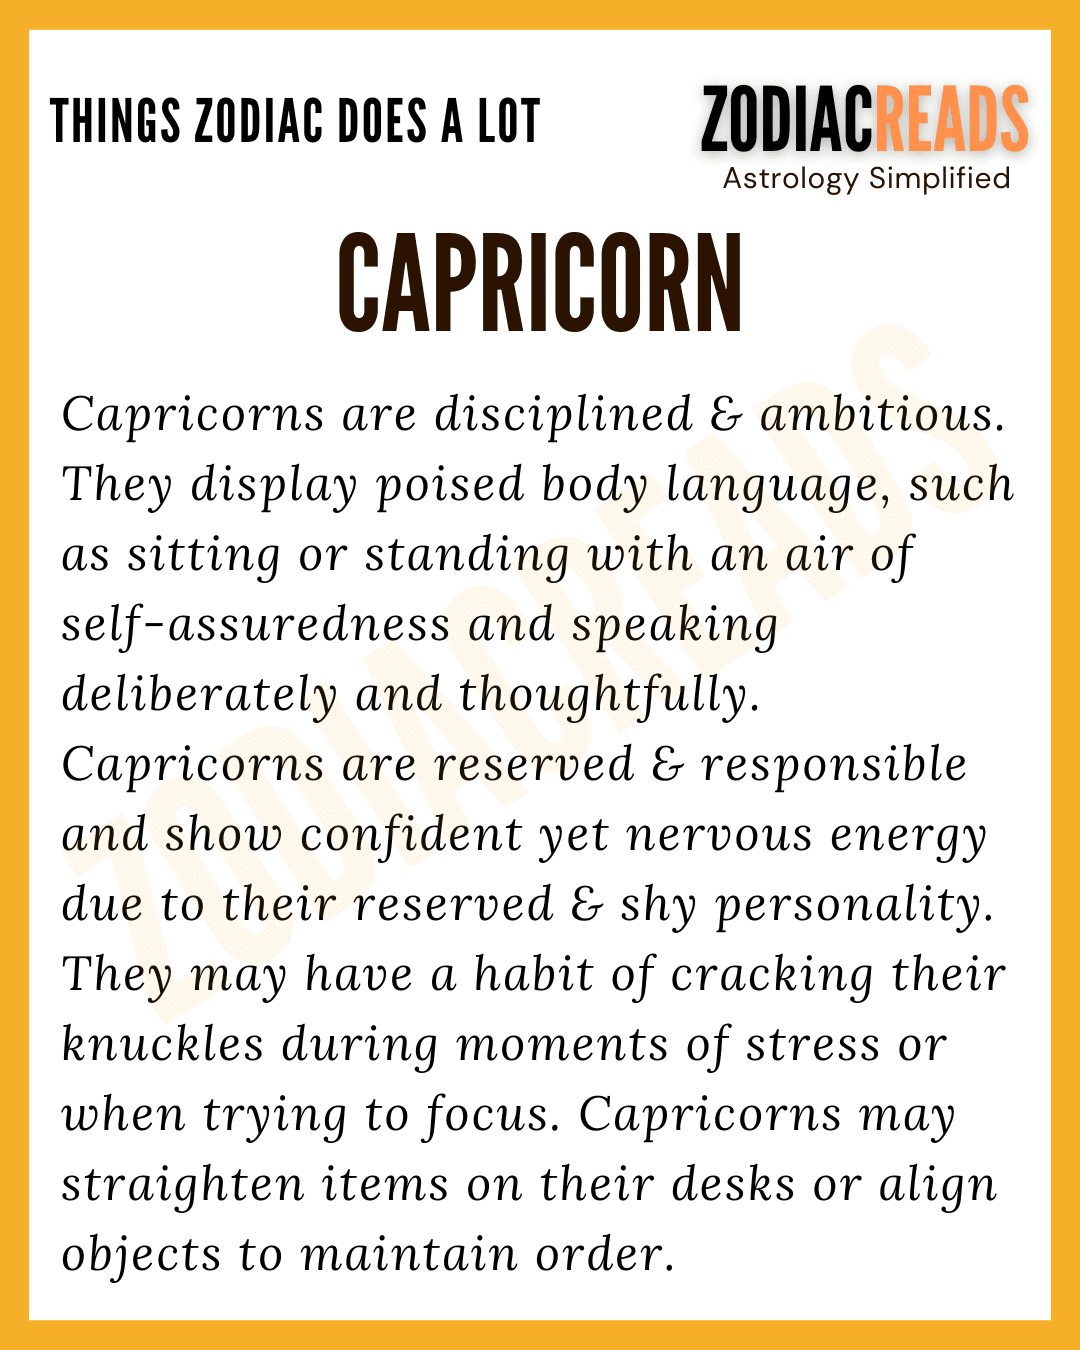 Capricorn Things That Zodiac Signs Tend To Do A Lot